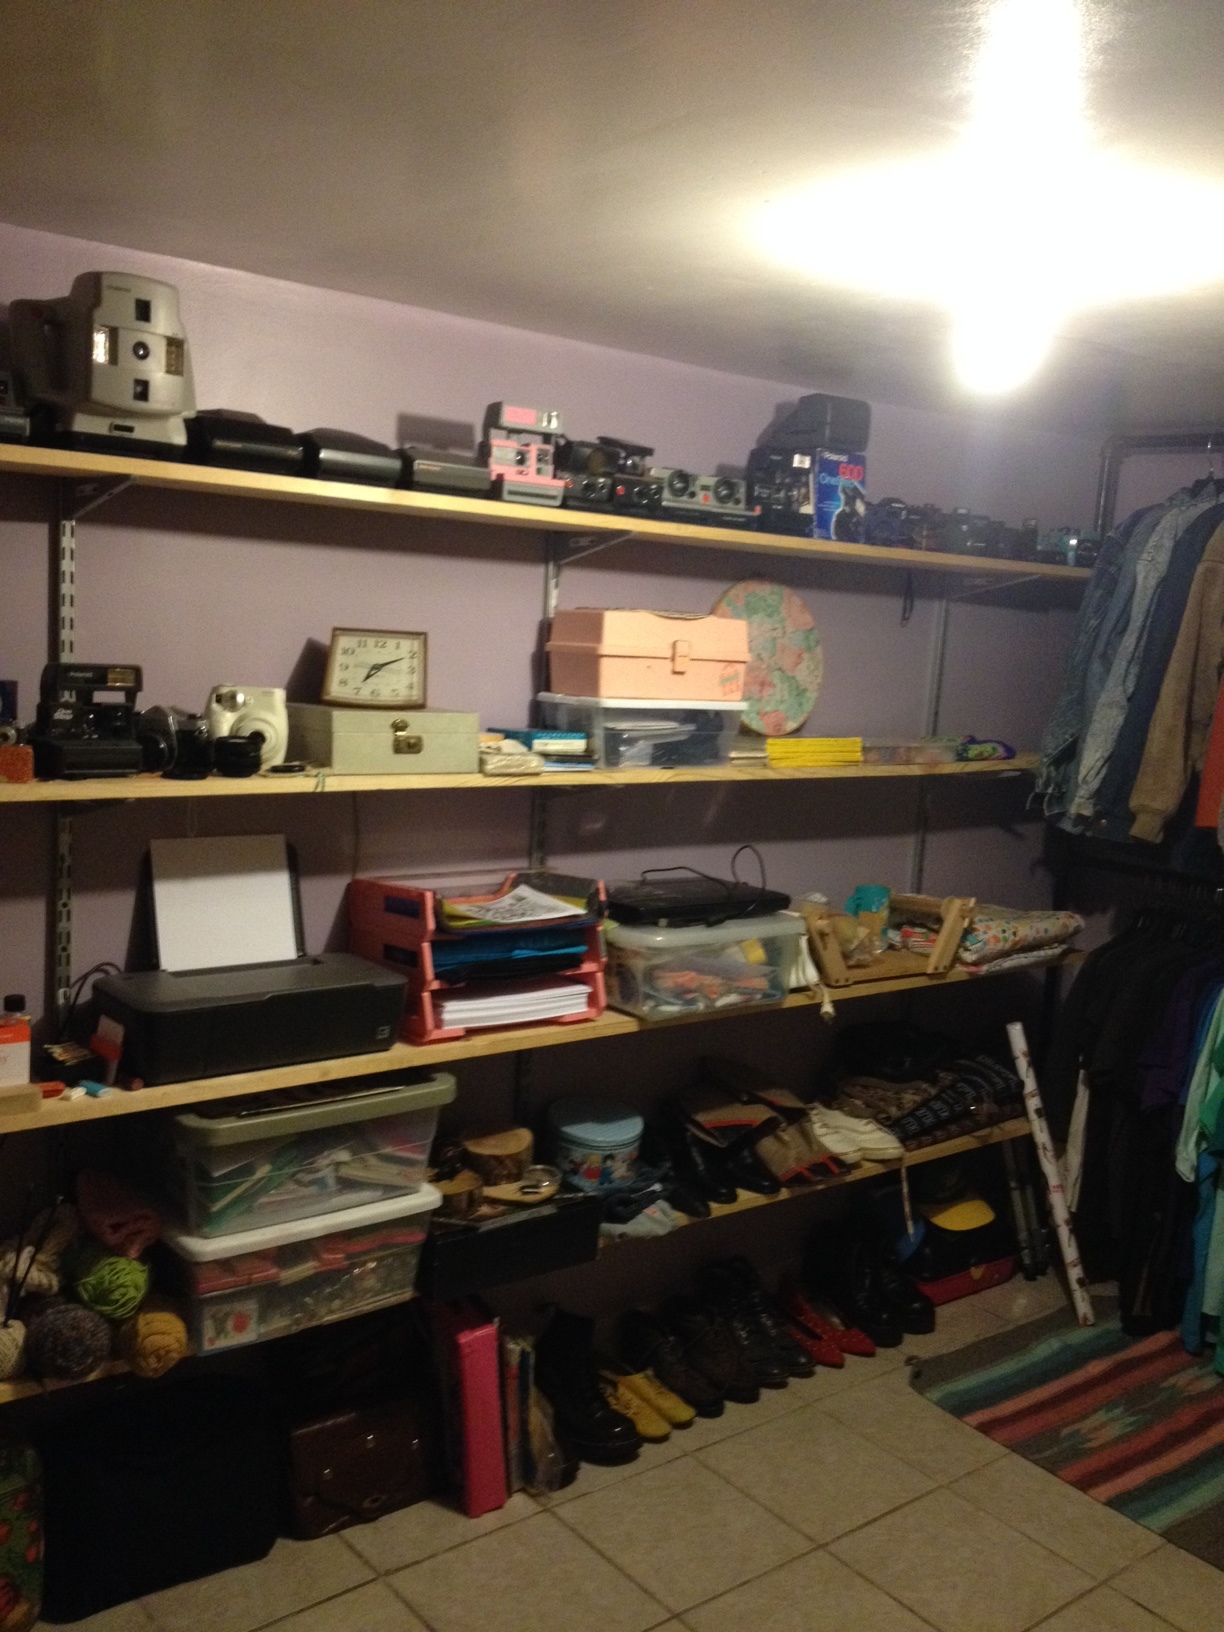  This is the small room of the basement apartment the shop was ran from in Humboldt Park, Chicago.&nbsp; 